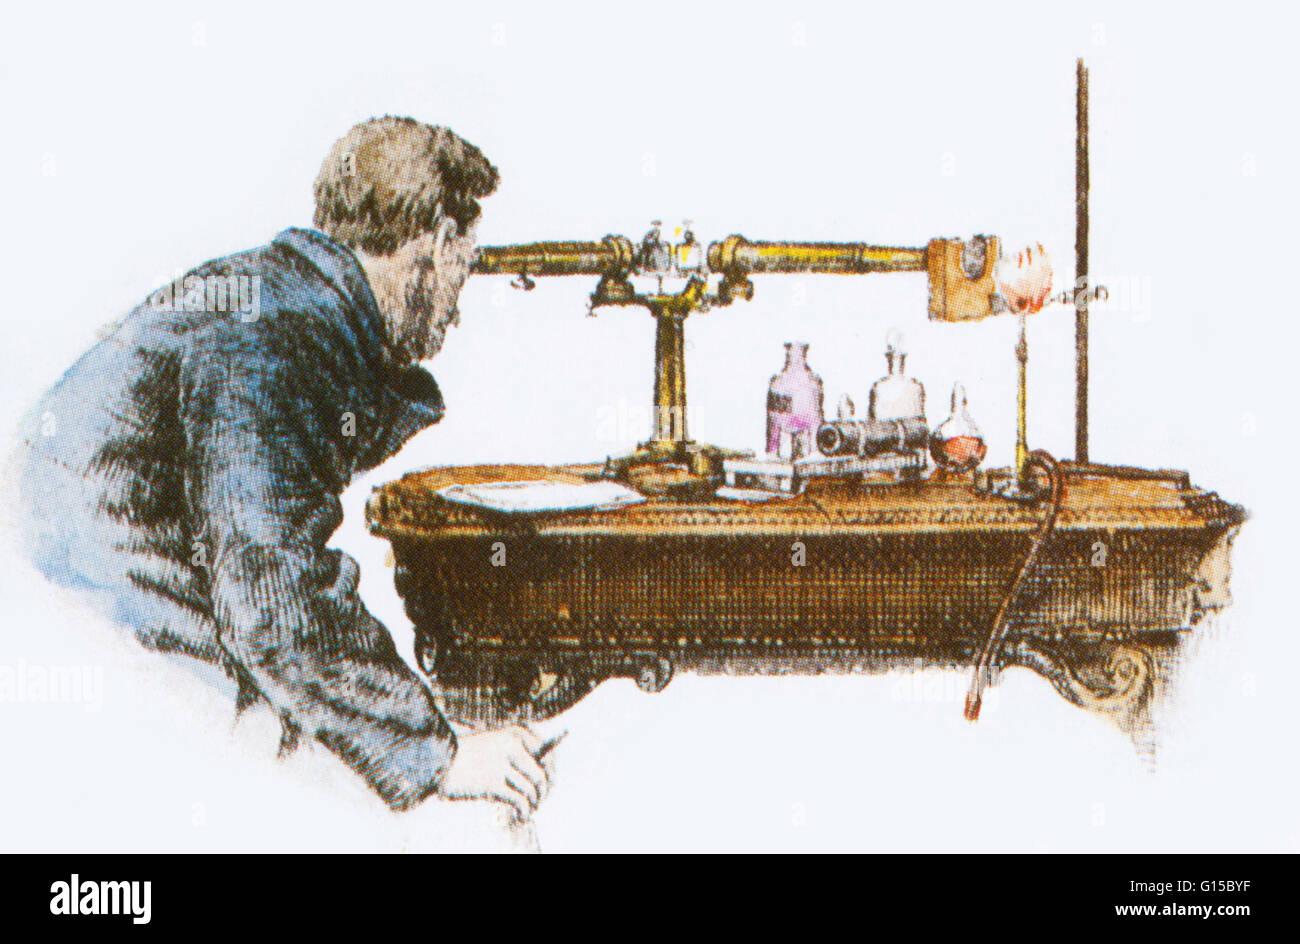 Bunsen using a spectroscope. In 1860 Robert Bunsen (1811-1899) and Gustav Kirchhoff (1824-1887) discovered two alkali metals, cesium and rubidium, with the aid of the spectroscope they had invented the year before. Bunsen and Kirchhoff met and became frie Stock Photo